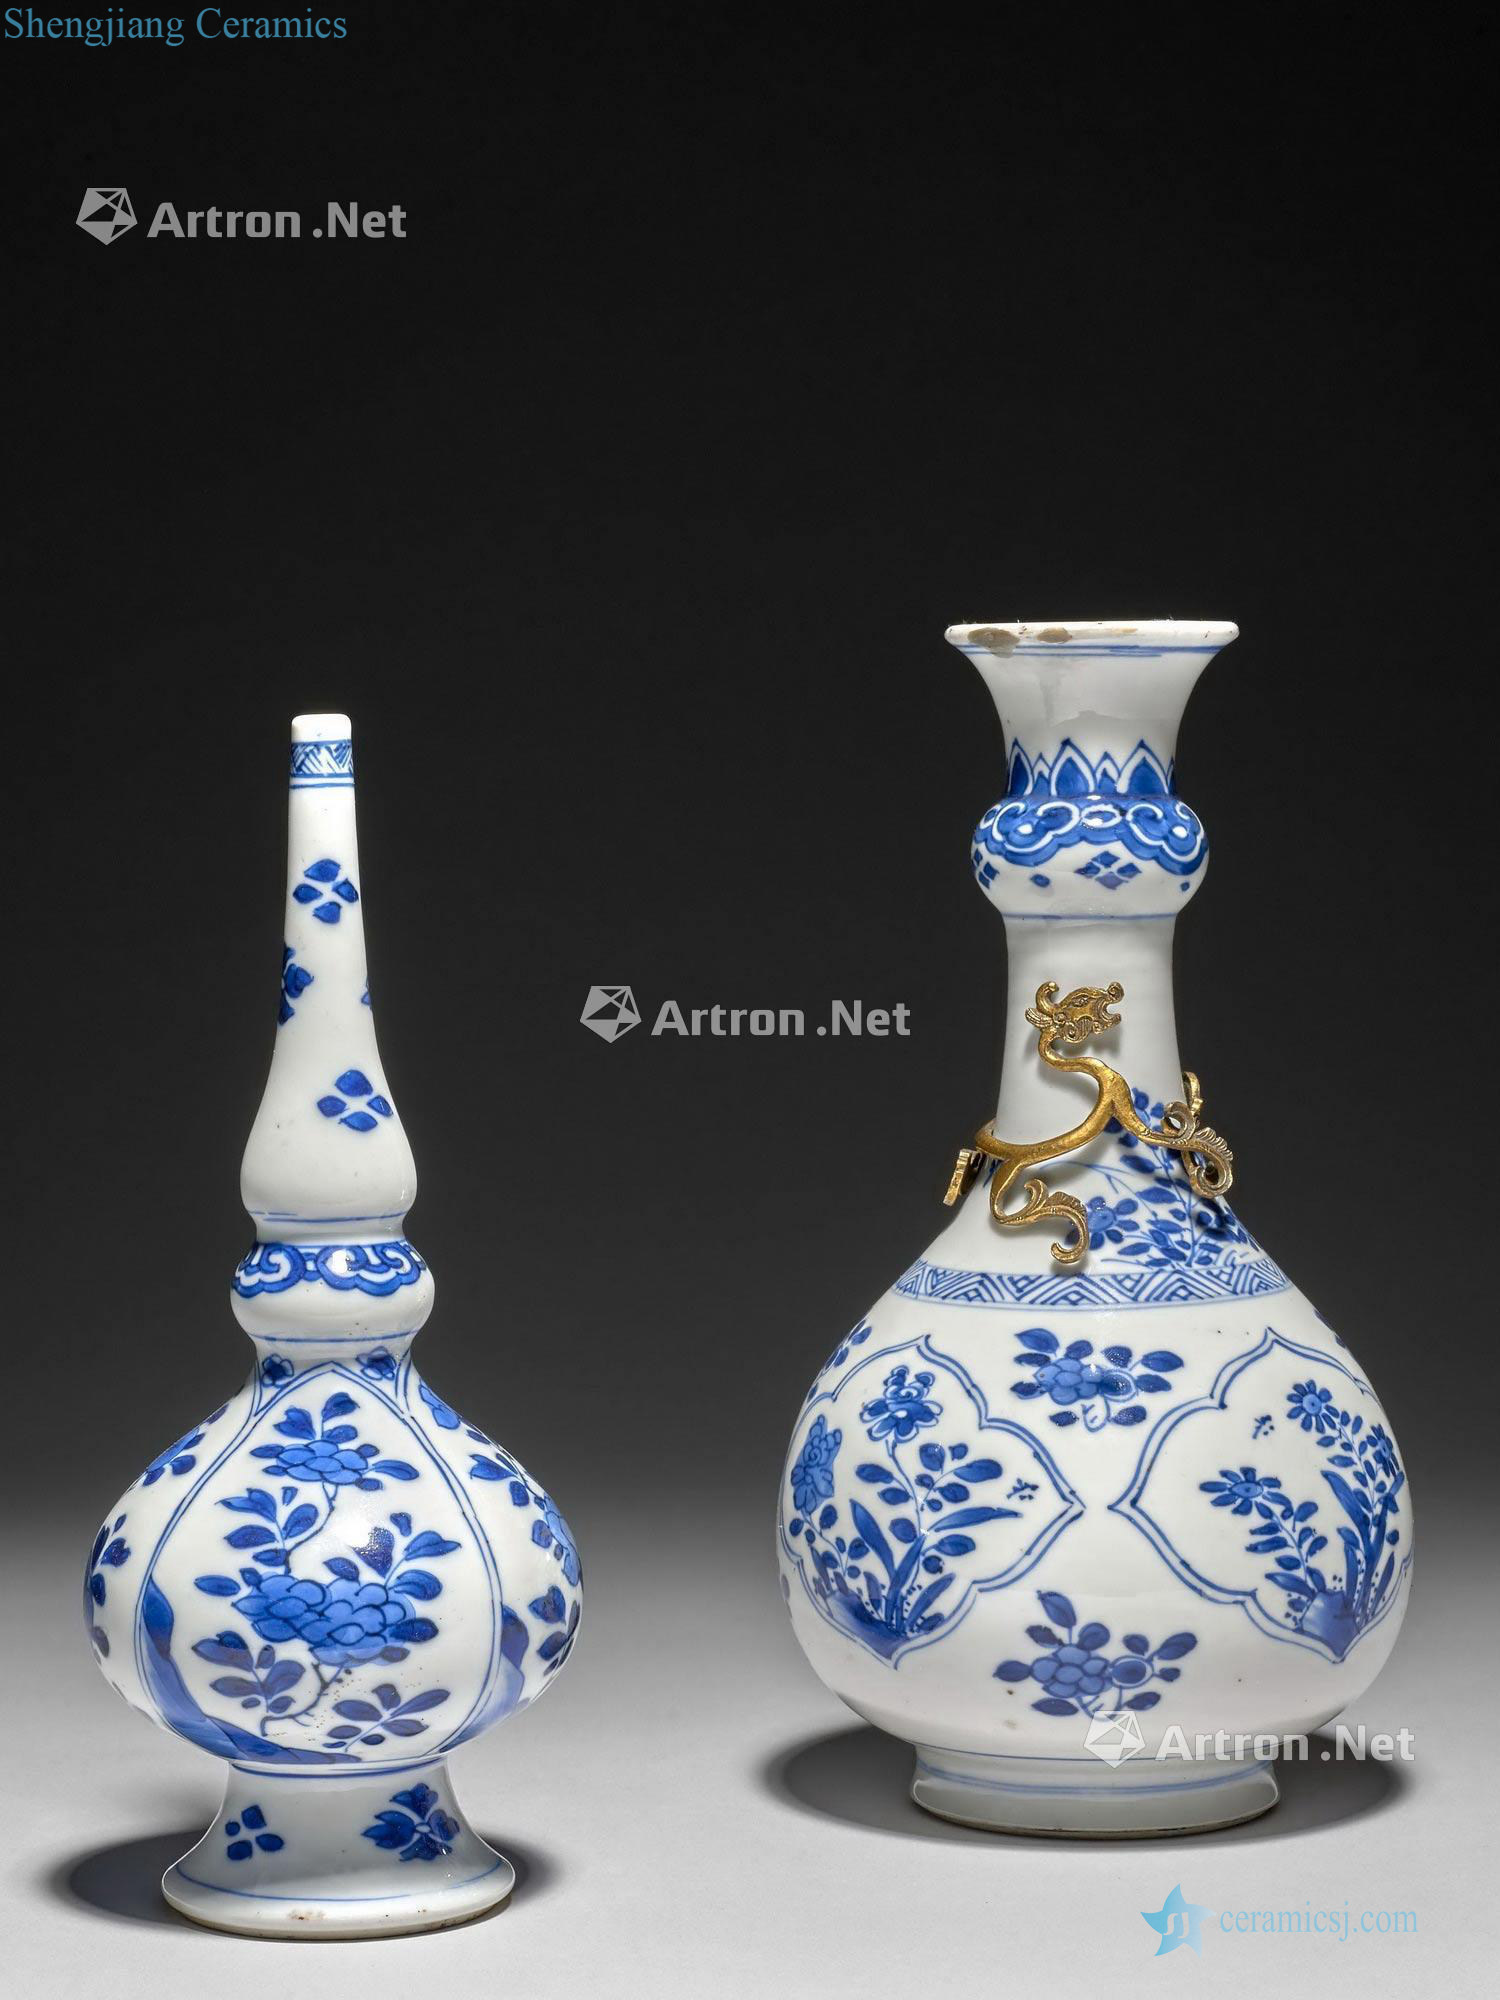 China, the Qing dynasty, Kangxi period (1662-1722), A blue and white porcelain vase and the an aspersorium